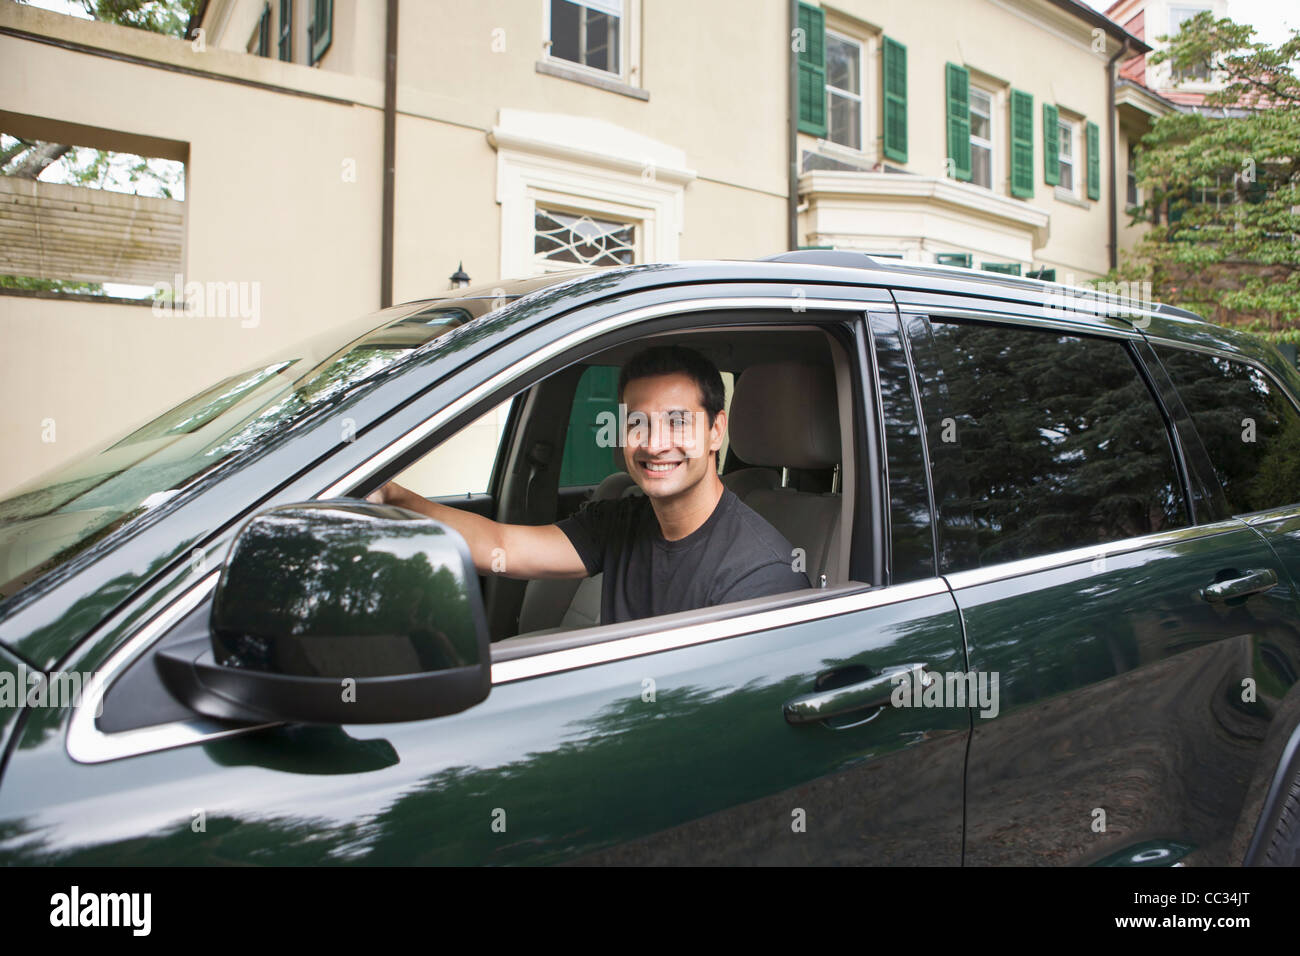 USA, New Jersey, Portrait of man driving car Stock Photo